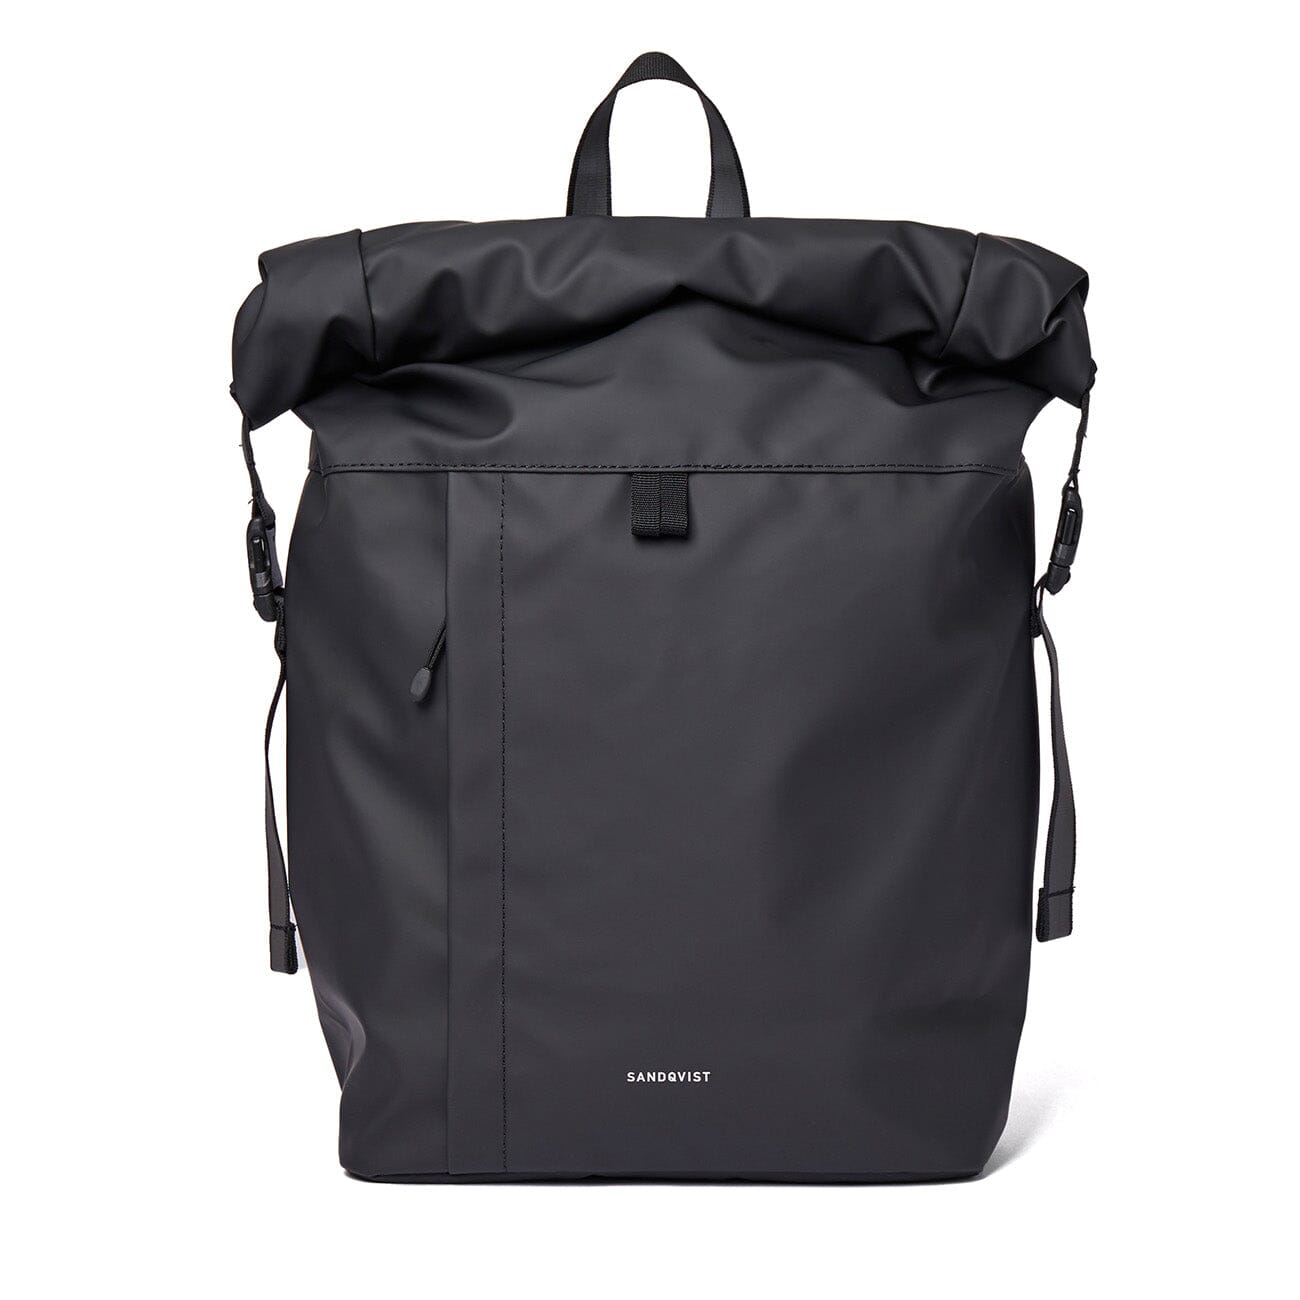 best small waterproof backpacks, designed with recycled polyester,  roll top opening,  konrad model from sandqvist in black color front view